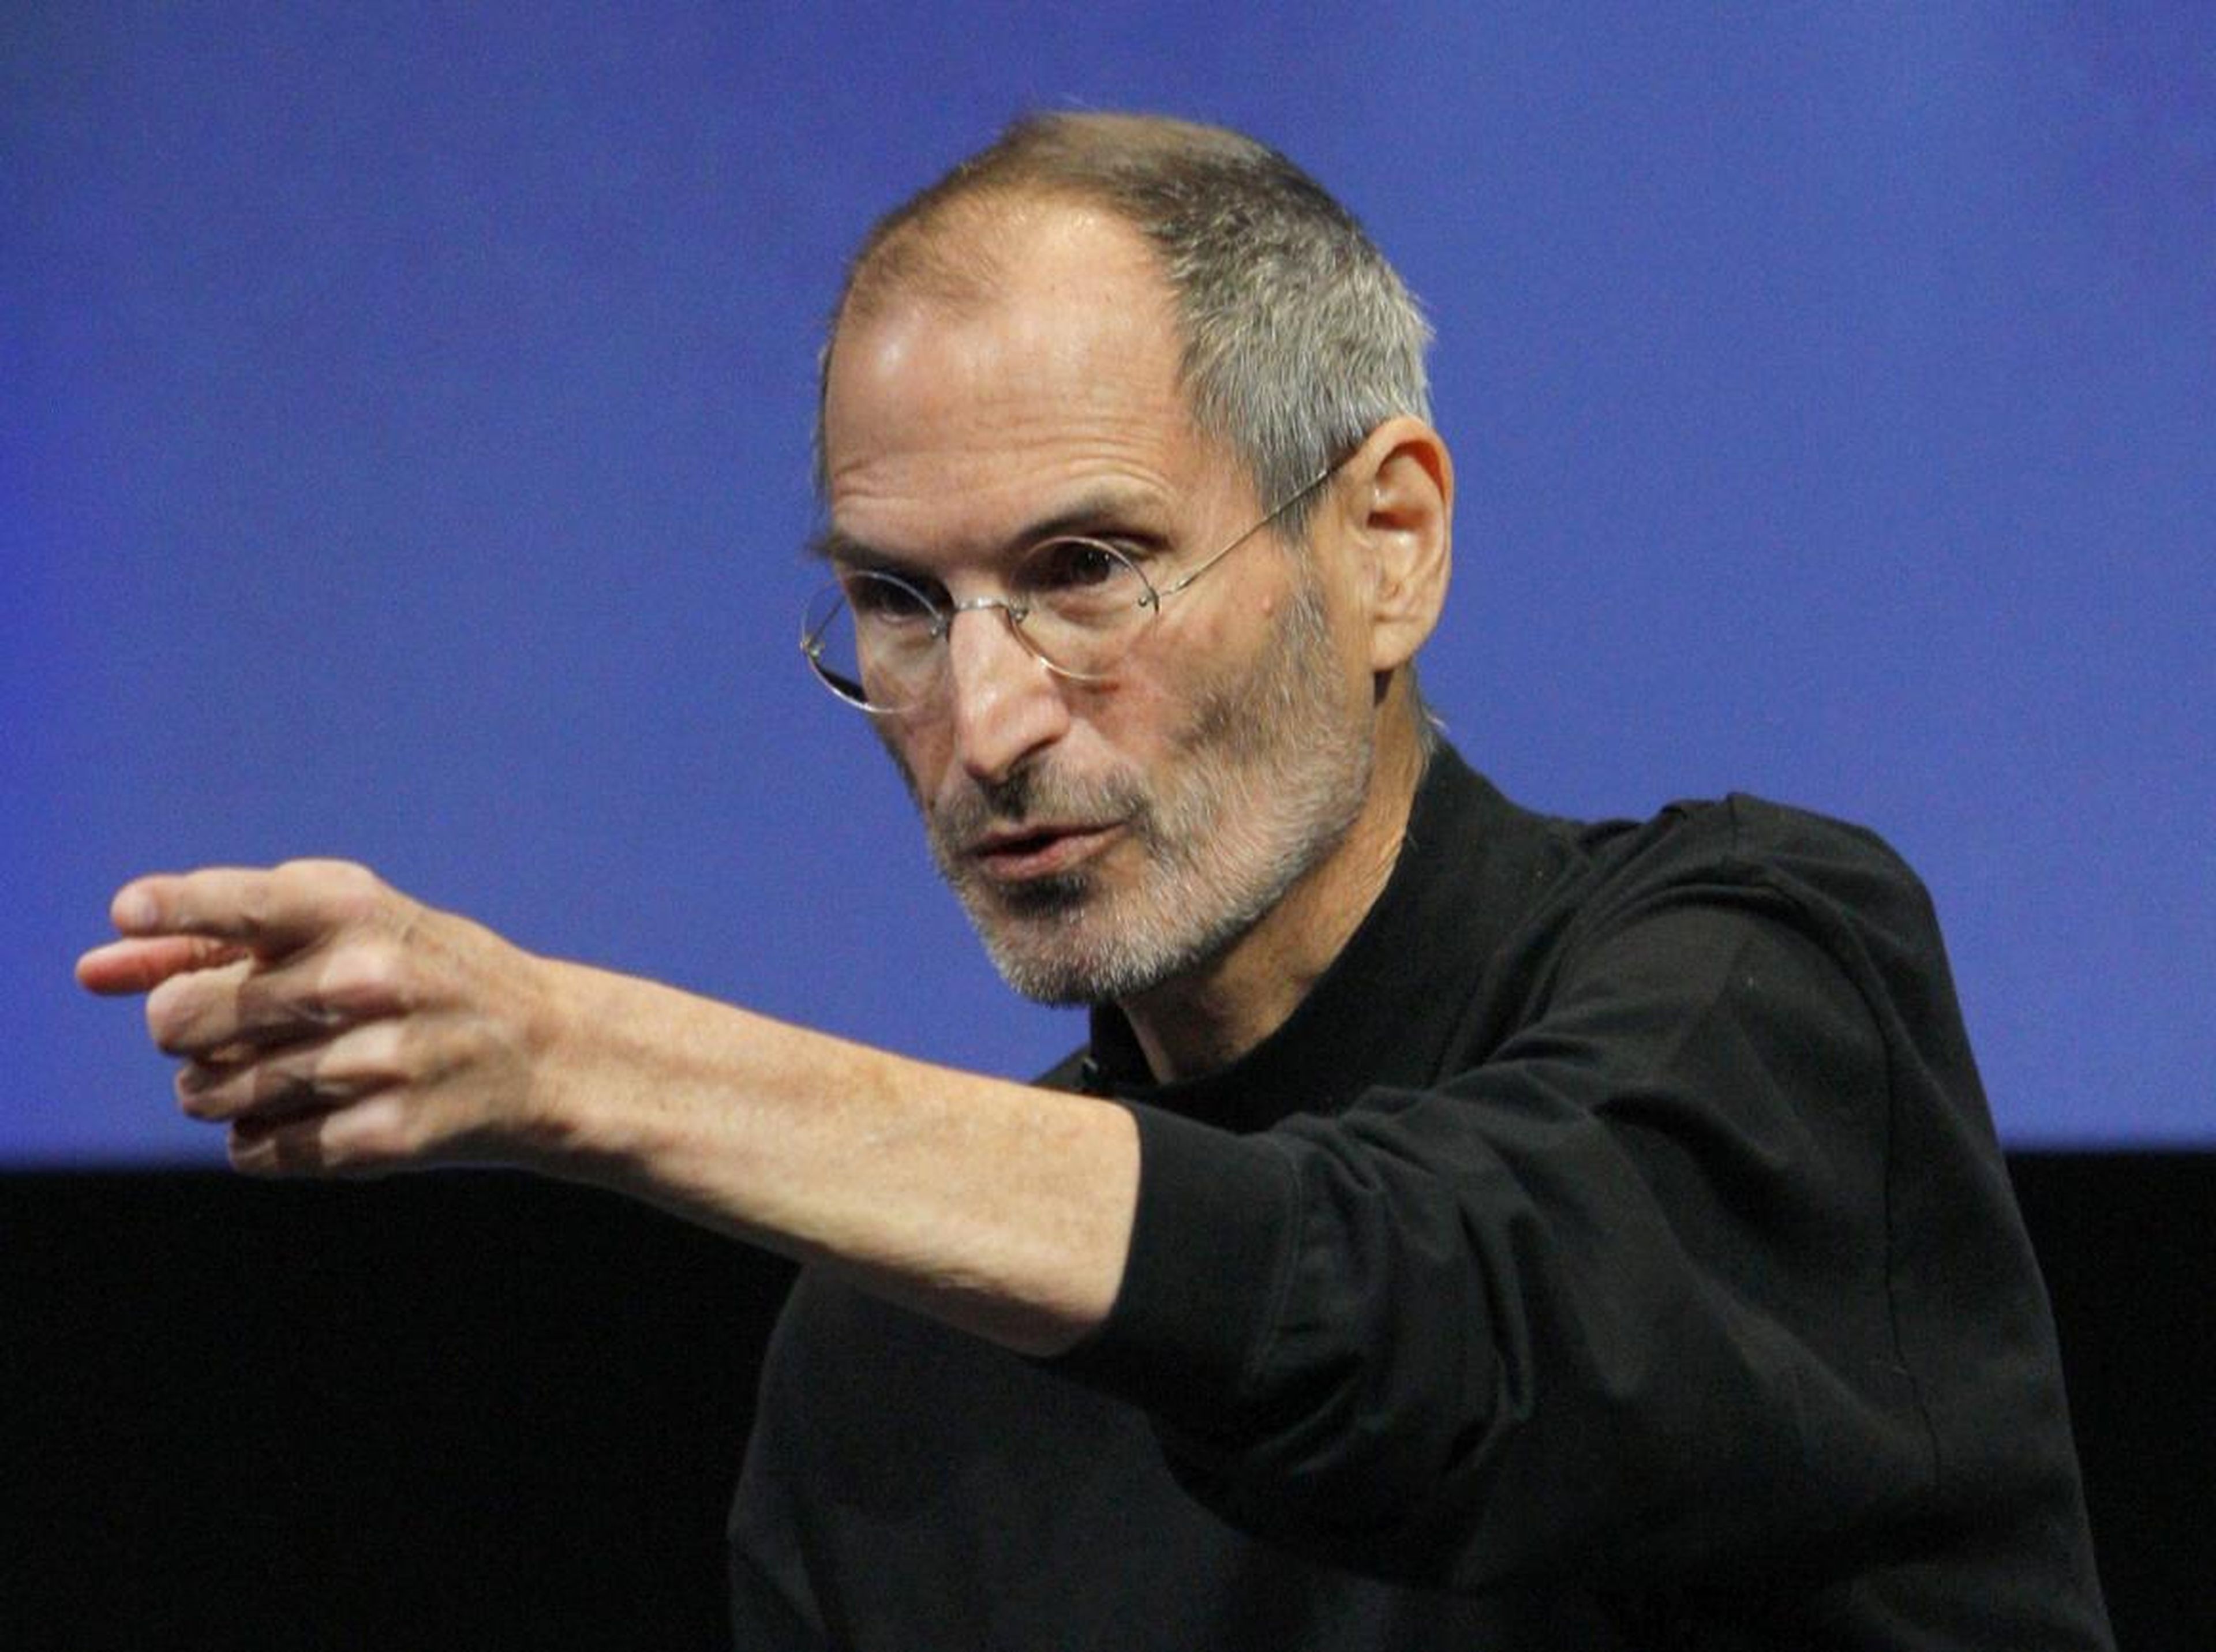 Steve Jobs, the former CEO of Apple who died in 2011.